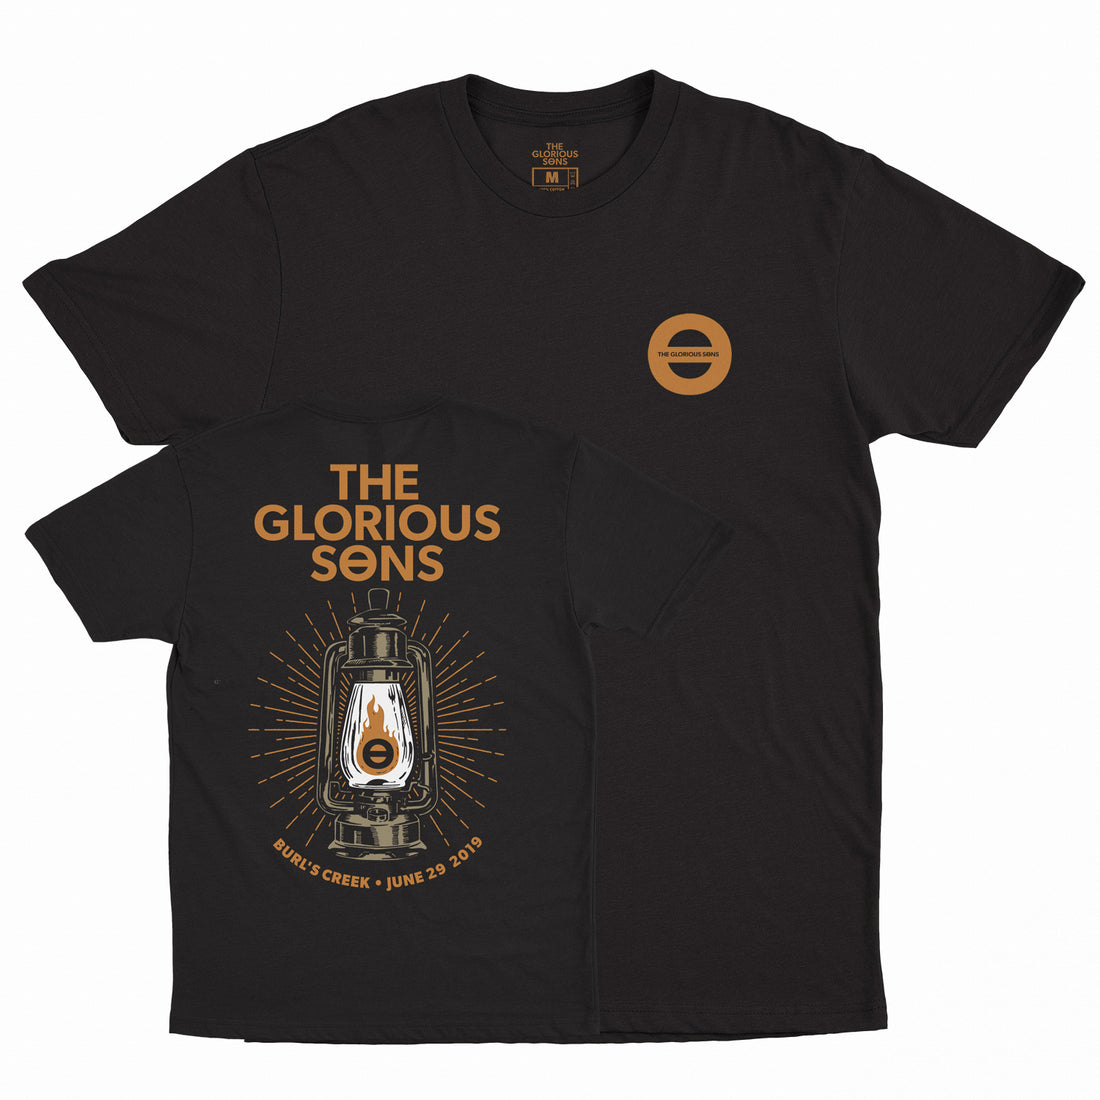 The Glorious Sons - Burl's Creek - Exclusive Festival Tee